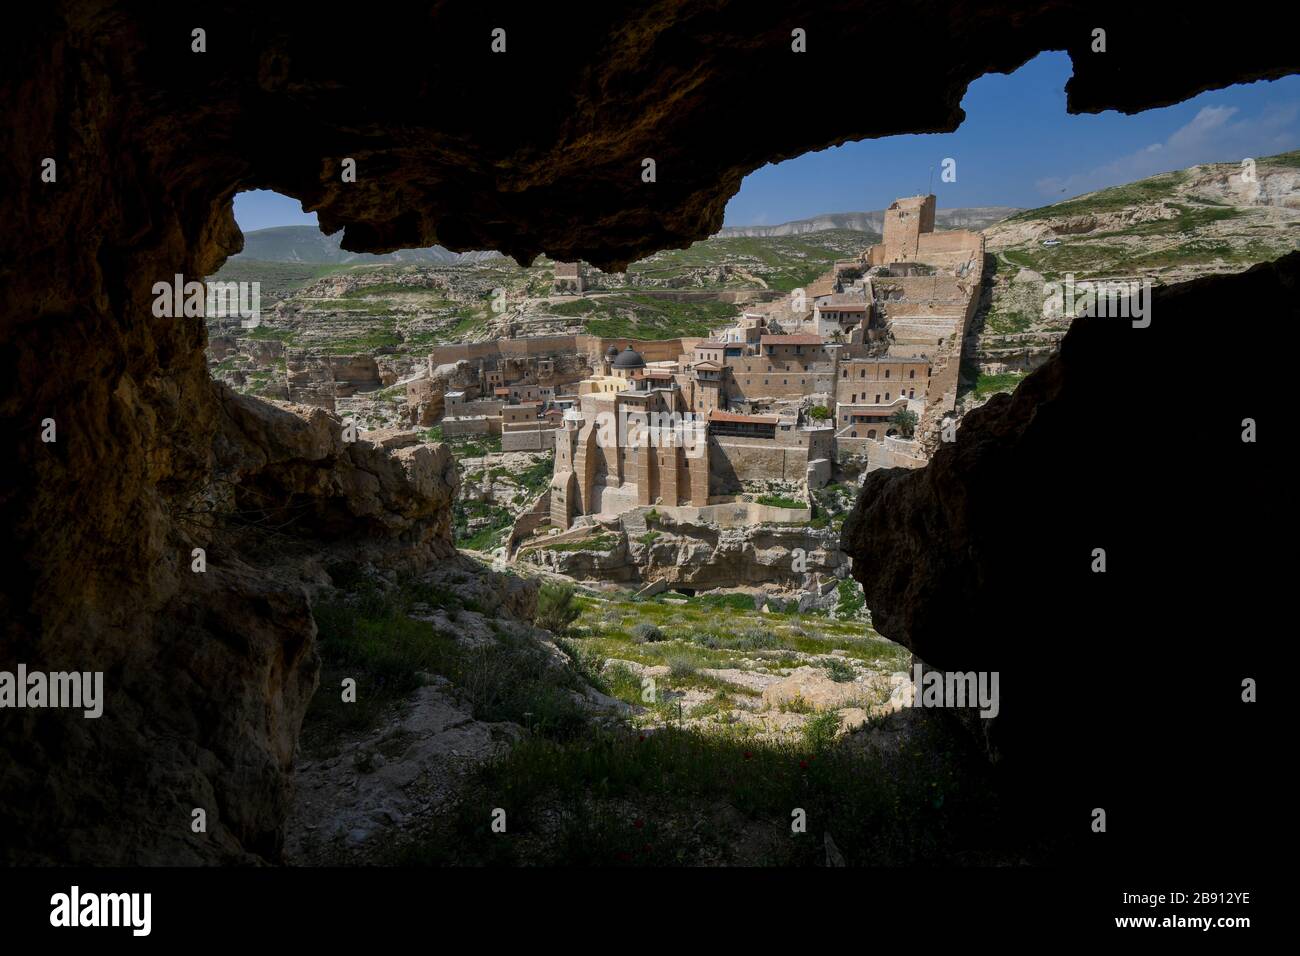 The Holy Lavra of Saint Sabbas known as Mar Saba is a Greek Orthodox monastery overlooking the Kidron Valley at a point halfway between the Old City o Stock Photo